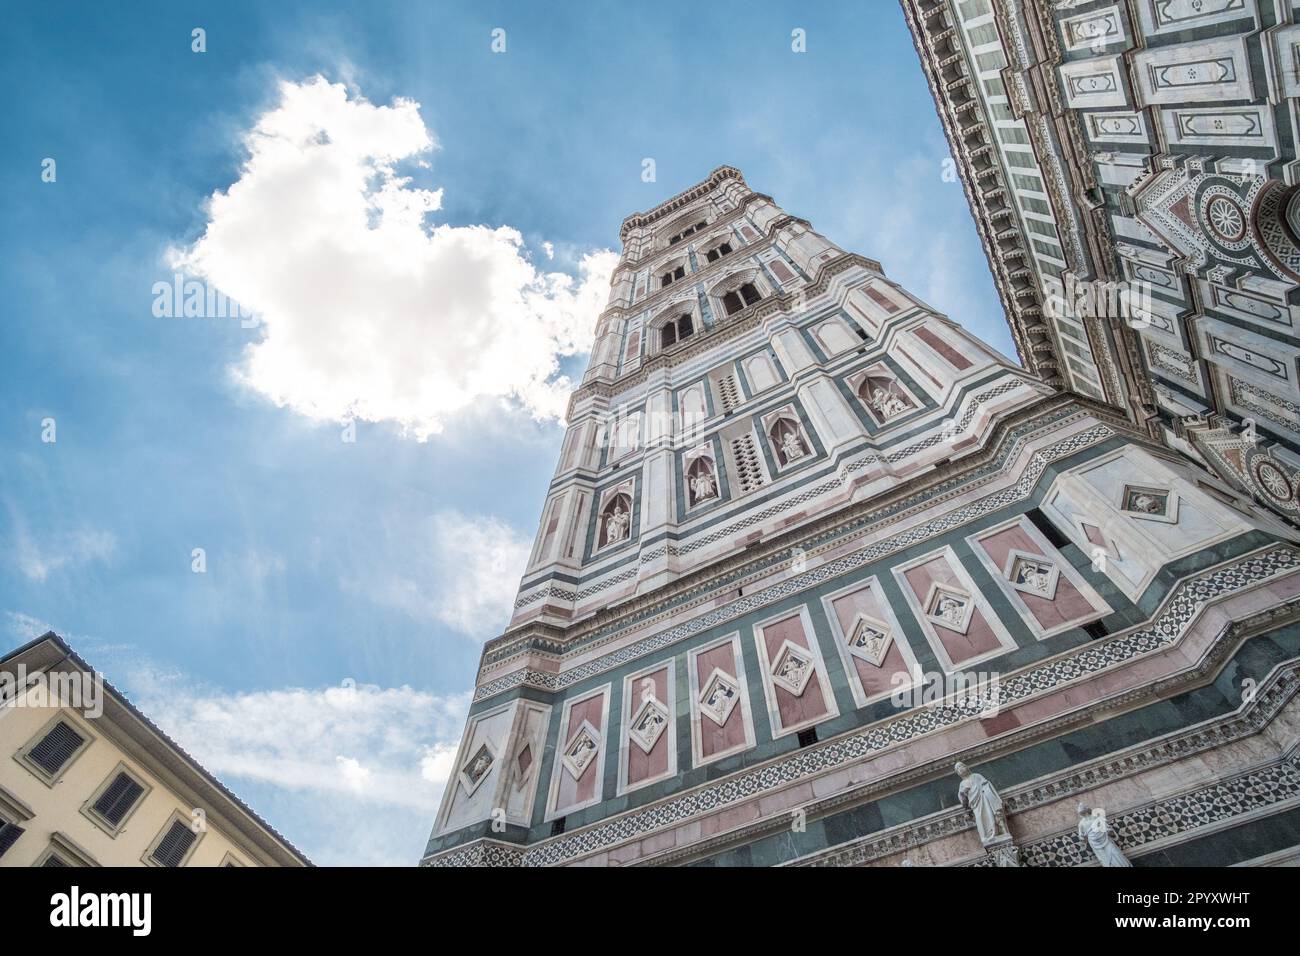 Giotto's Campanile, a bell tower which is a part of Florence Cathedral on the Piazza del Duomo in Florence, Italy. Stock Photo